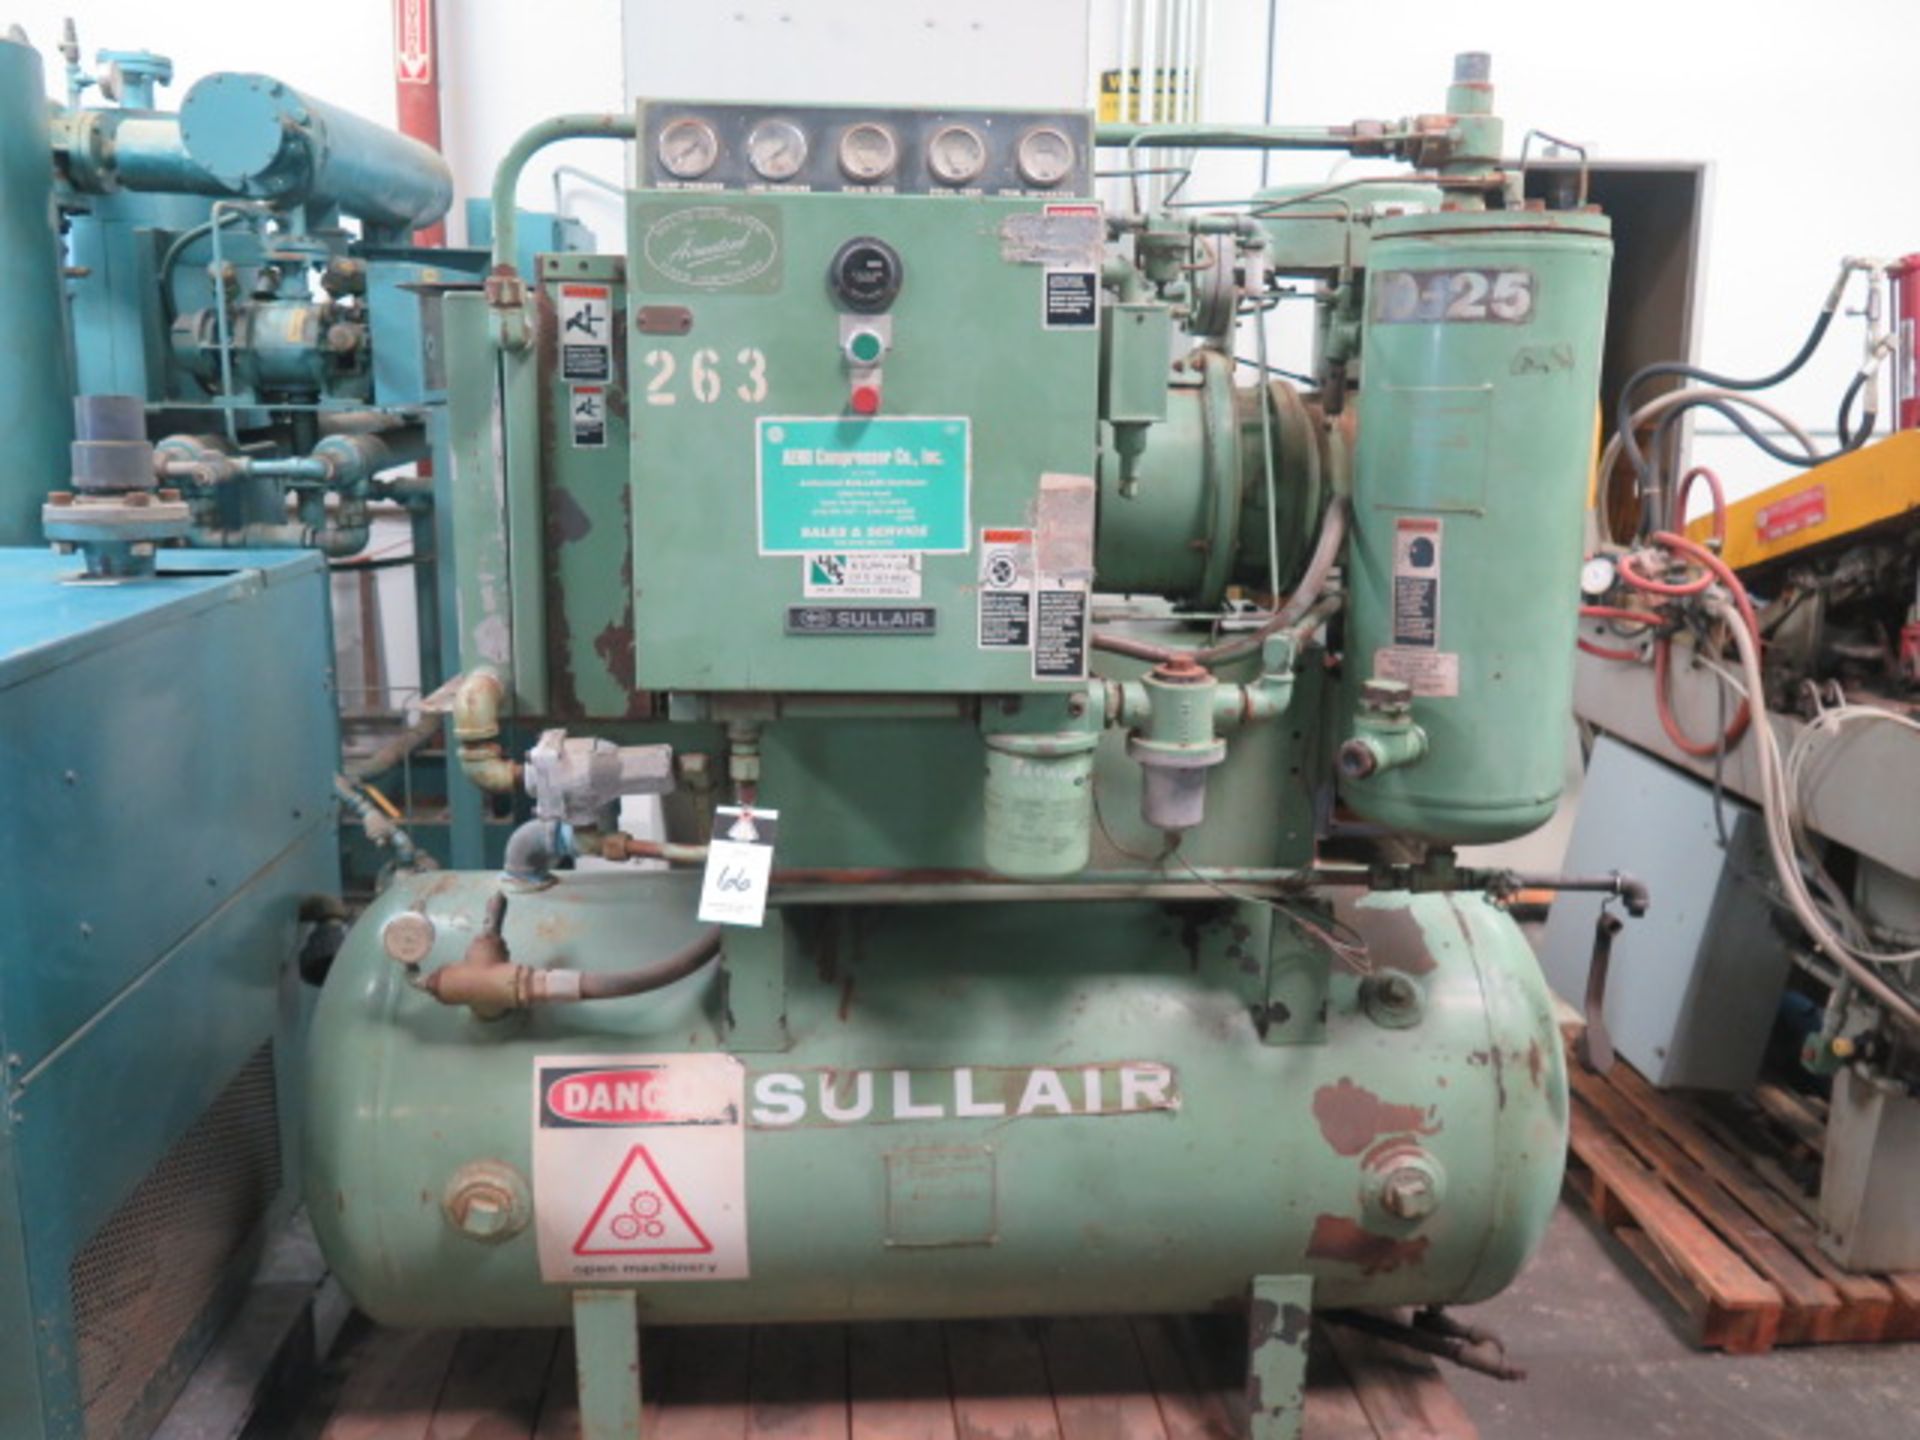 Sullair 10-25ACAC Rotary Vane Air Compressor s/n 003-76727 w/ Tank (SOLD AS-IS - NO WARRANTY)